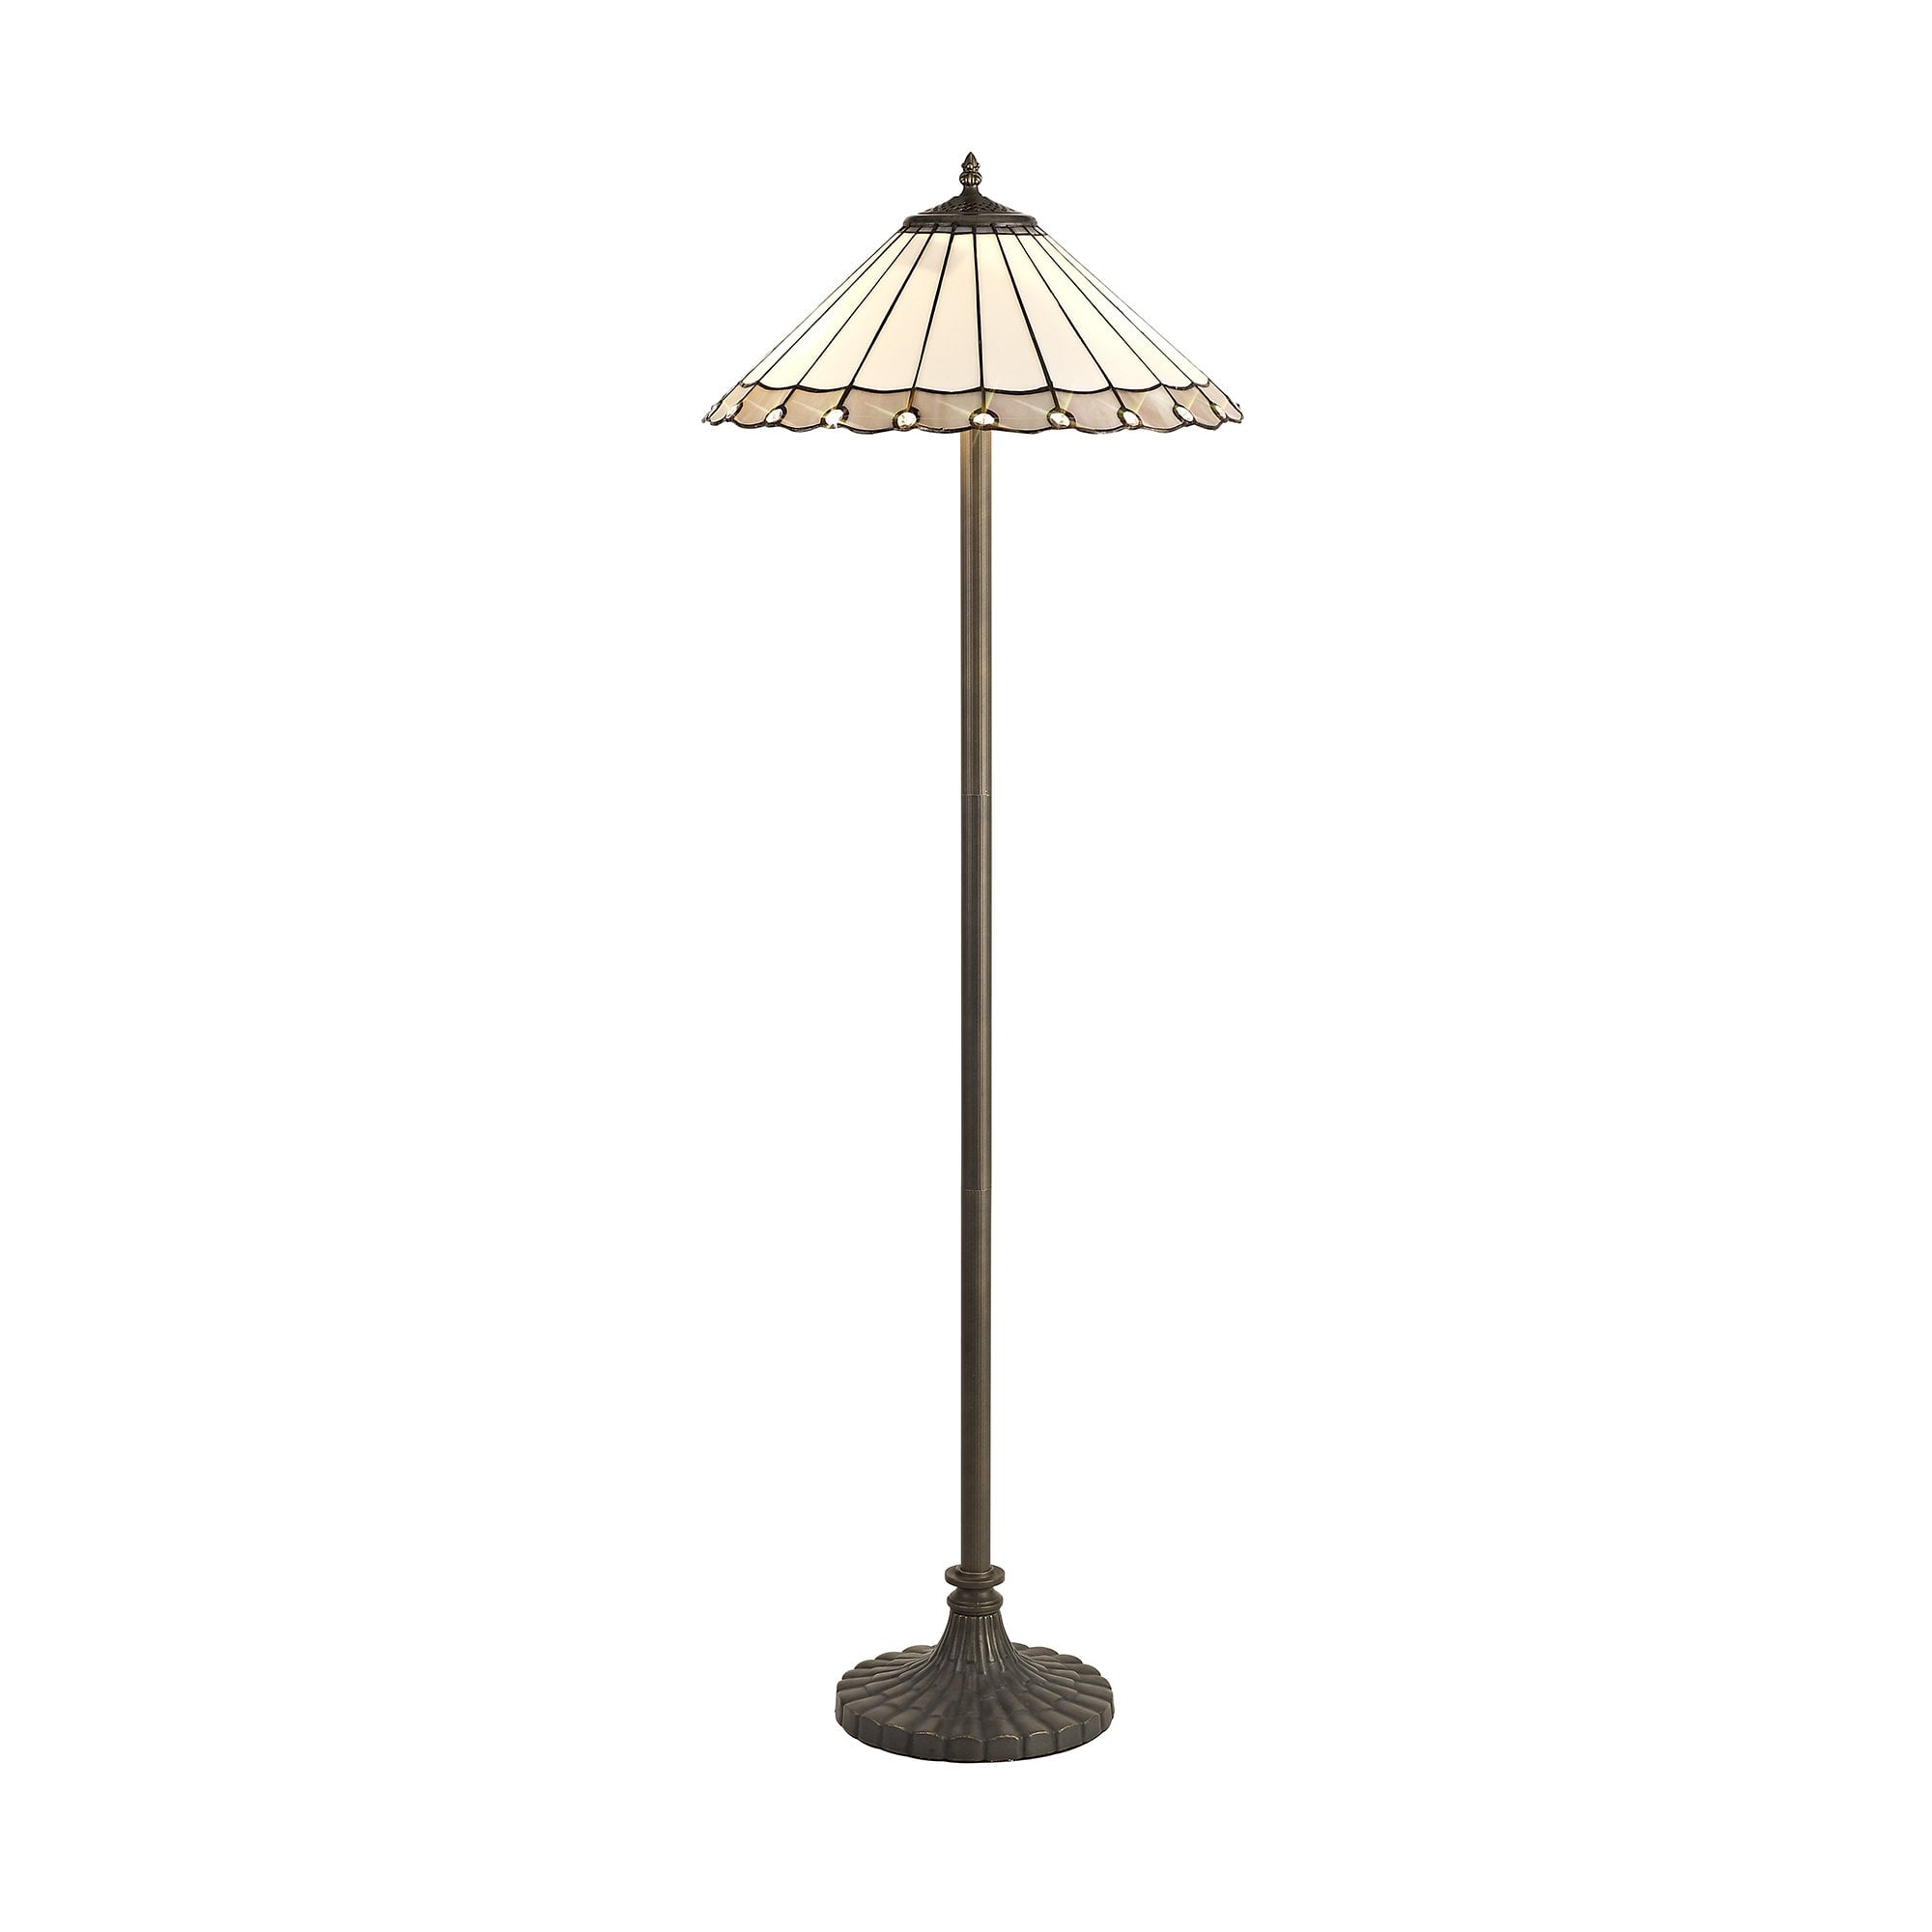 2 Light Stepped Design Floor Lamp E27 With 40cm Tiffany Shade, Grey/Cream/Crystal/Aged Antique Brass